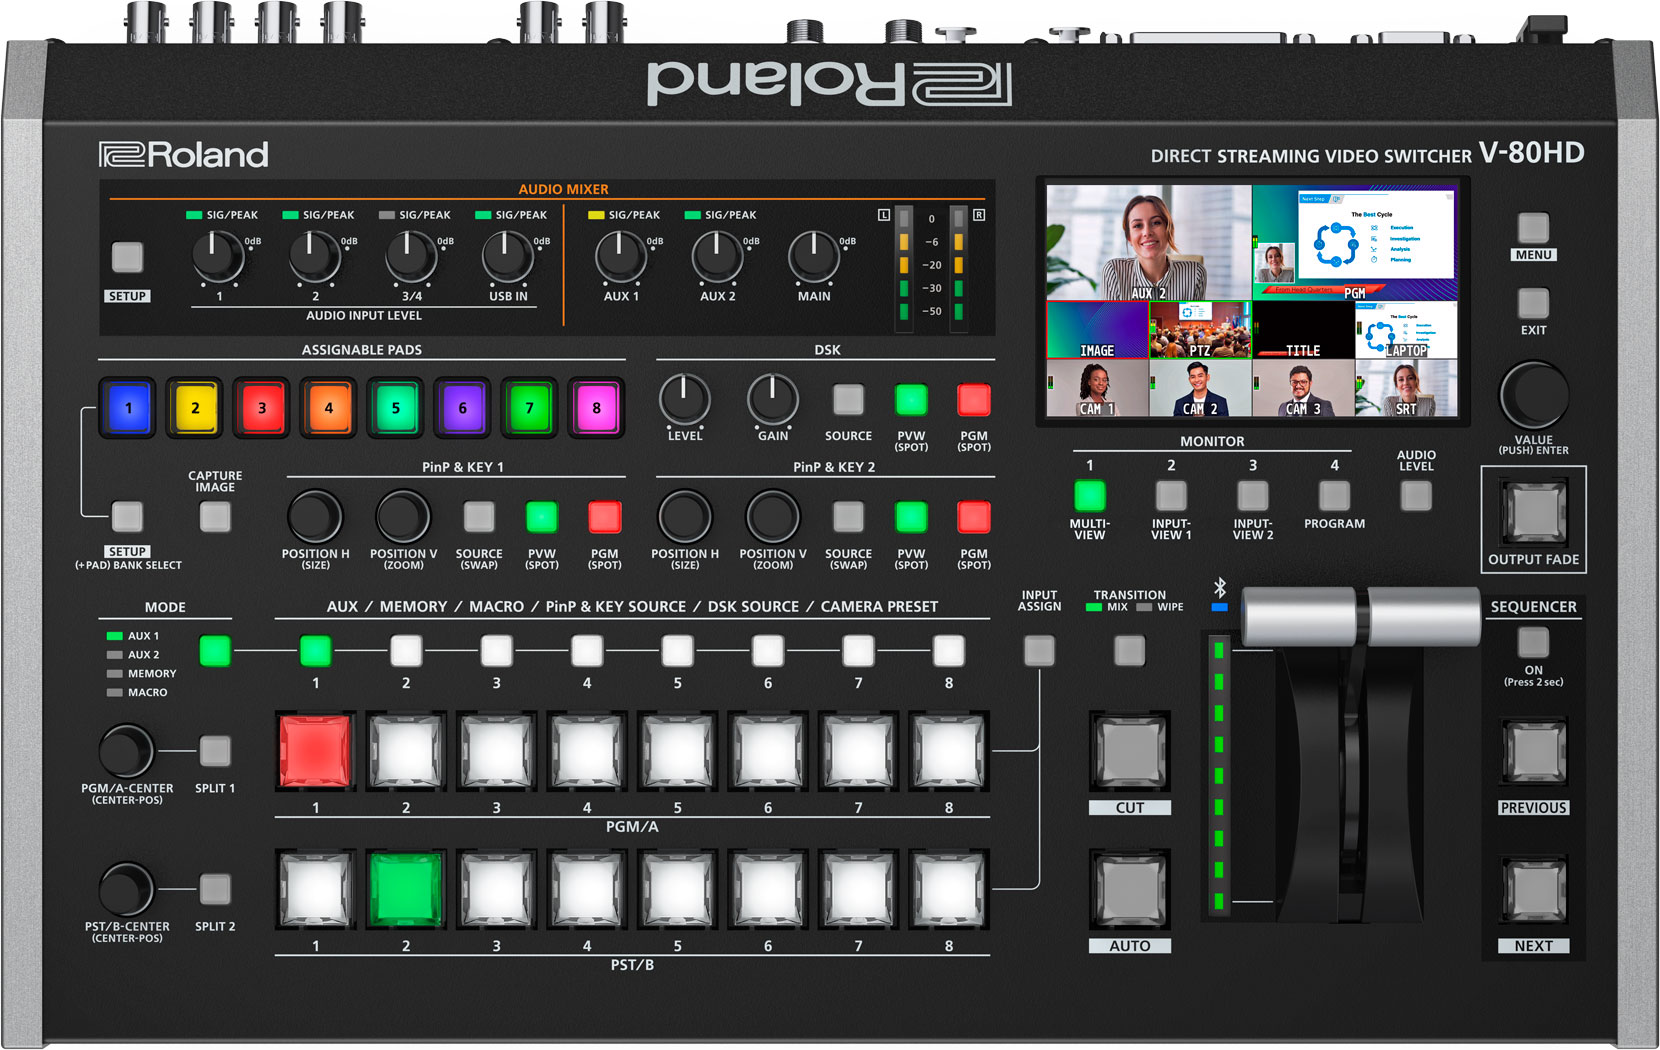 ROLAND V-80HD DIRECT STREAMING VIDEO SWITCHER